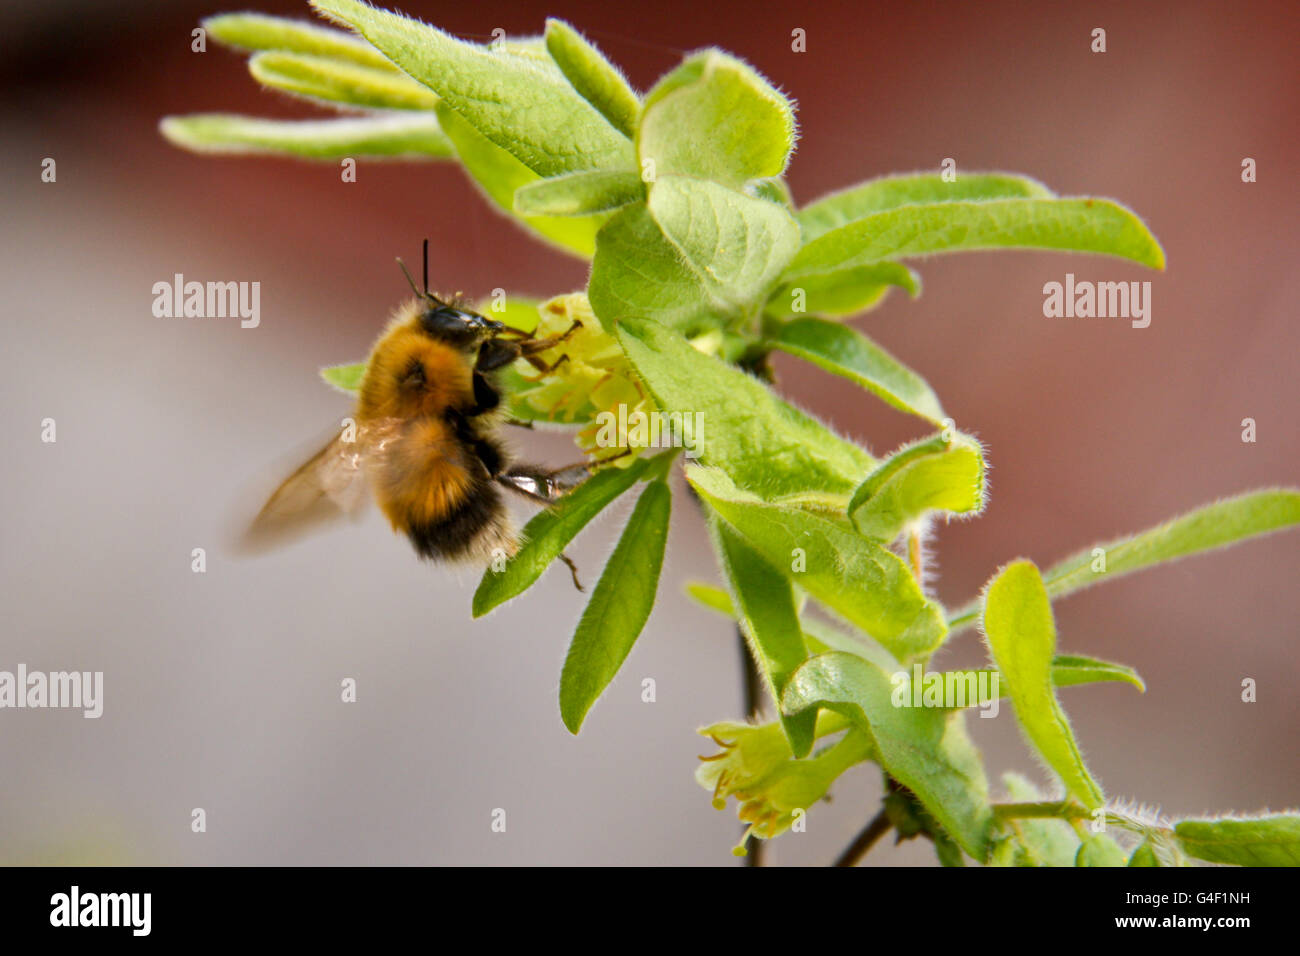 Bumblebee collects nectar from flowers Stock Photo